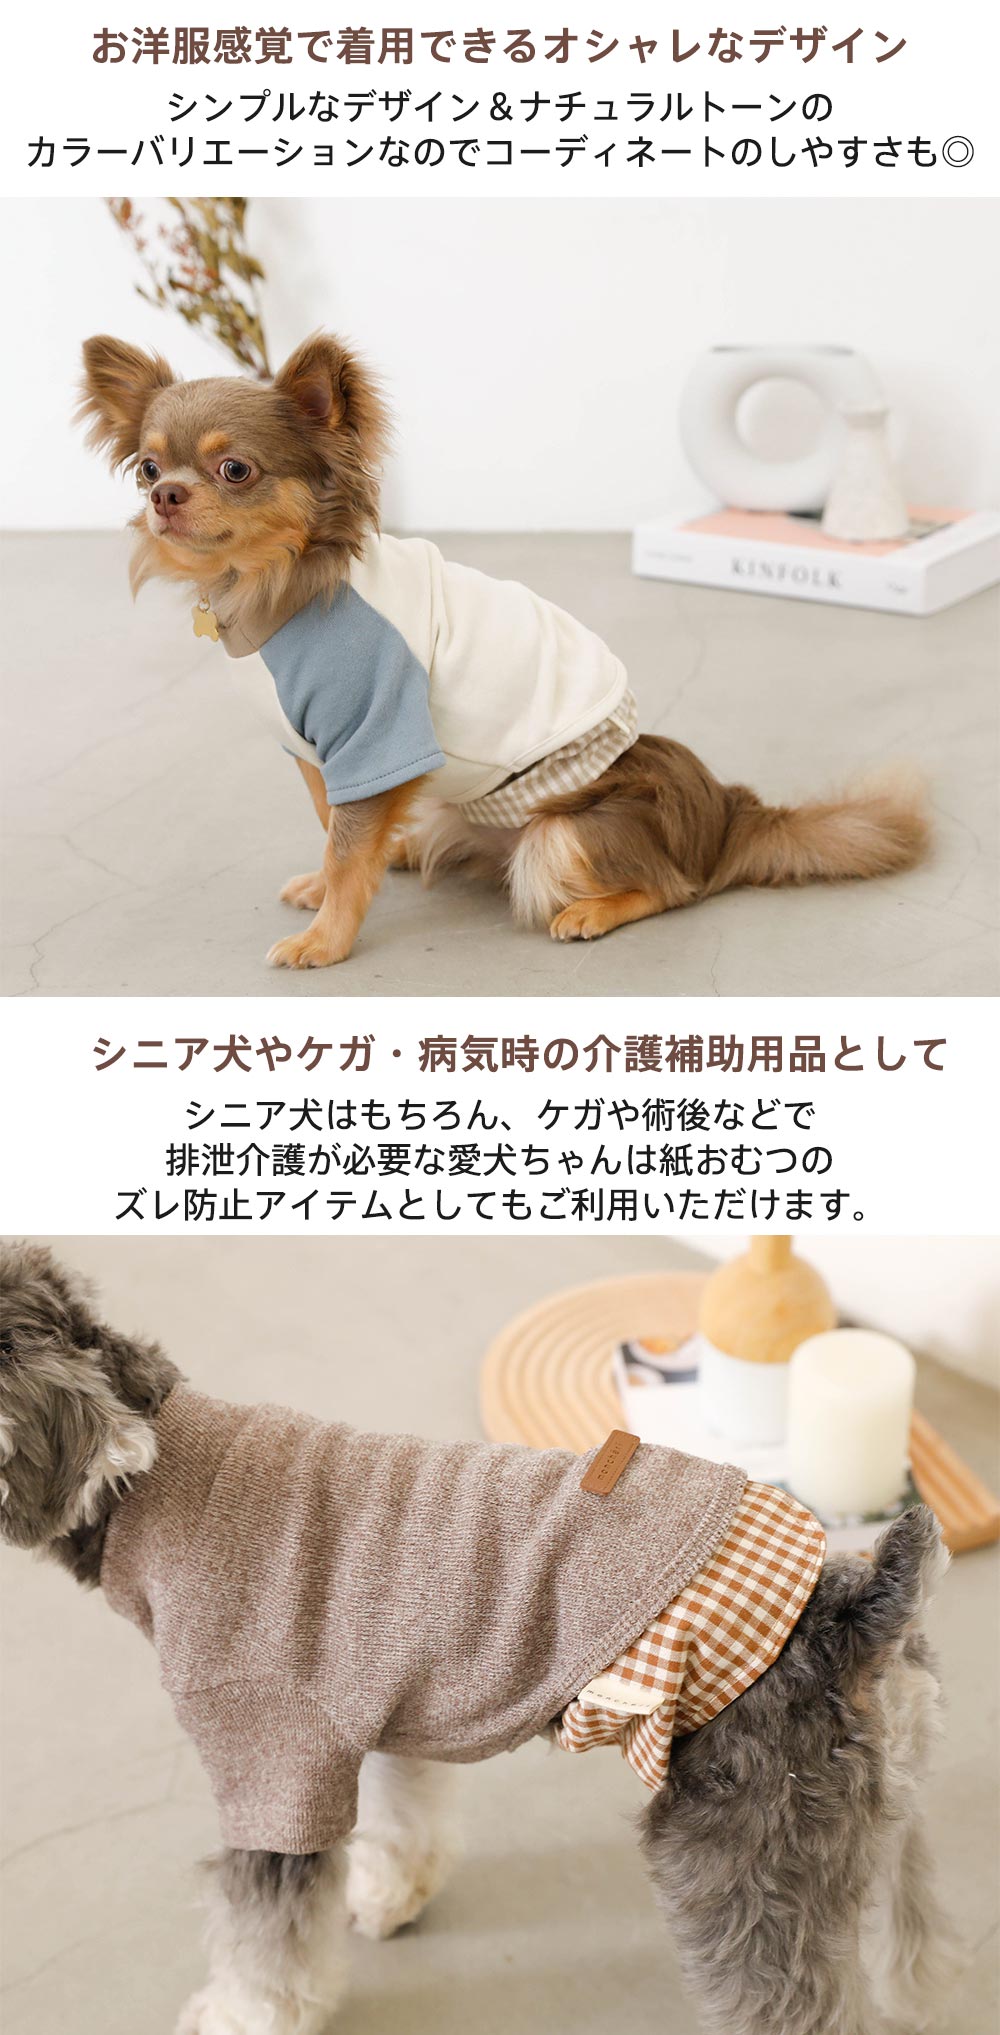 Small dog/manner belt/male/boy/fashion/cute/cute/2way/check pattern/Recommended point 2